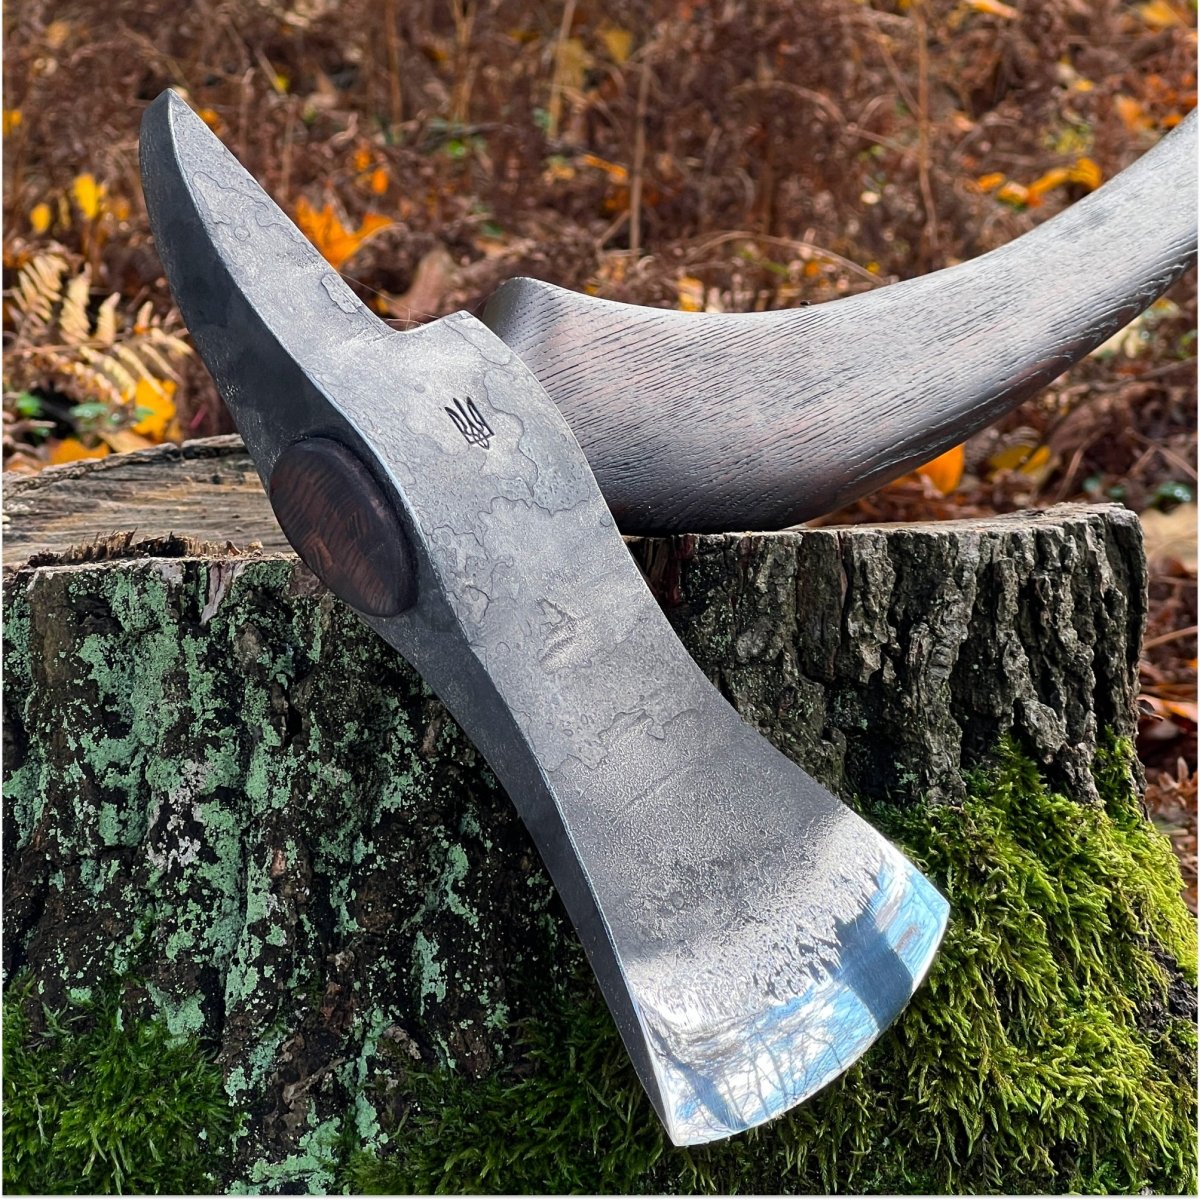 Hand forged Fireman's Axe "American superhero" with leather case from AncientSmithy